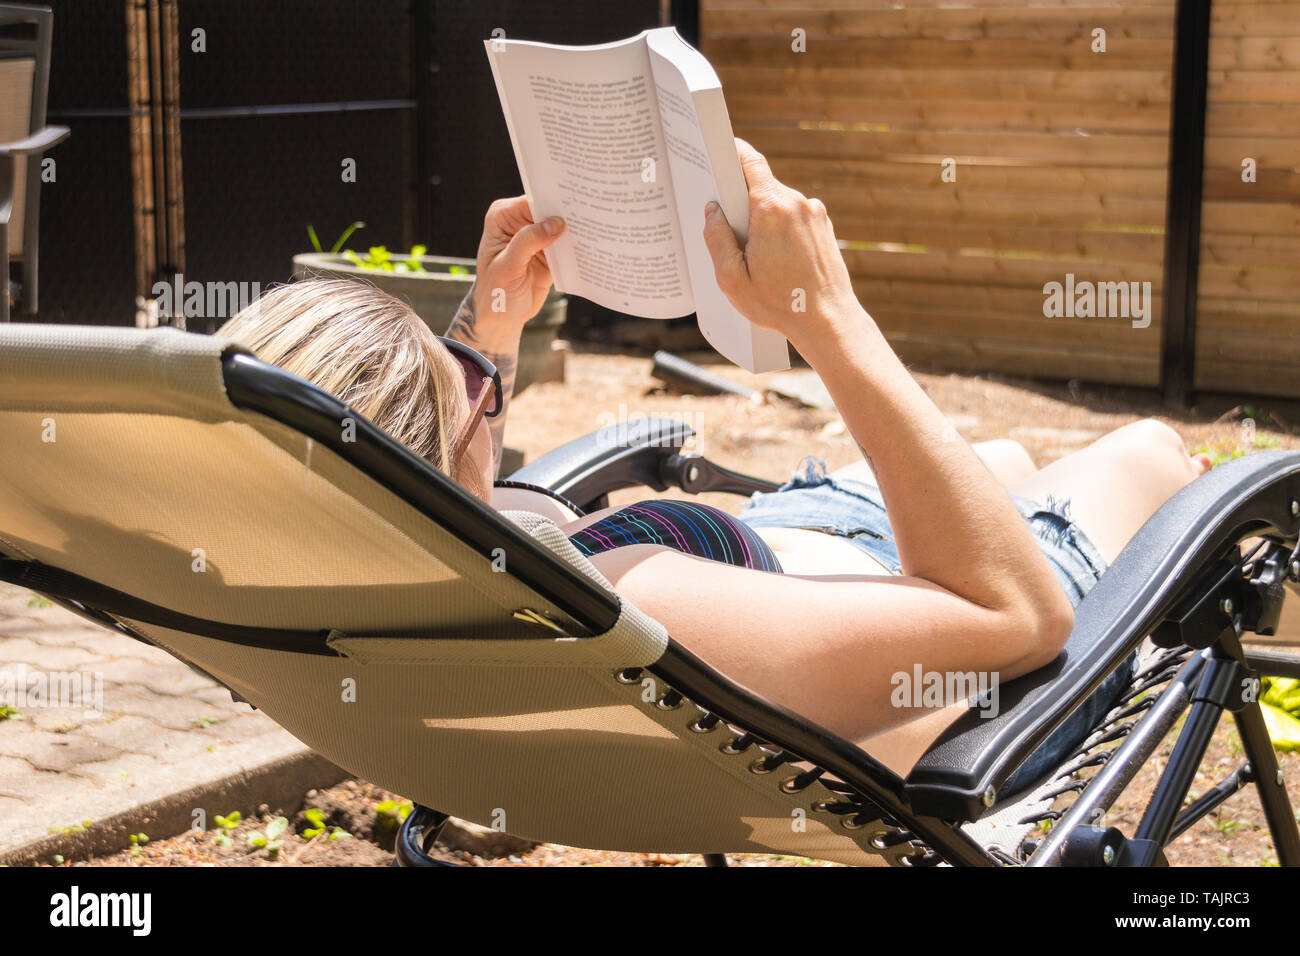 blond woman reading a book and taking sunbath in the backyard at summer time Stock Photo